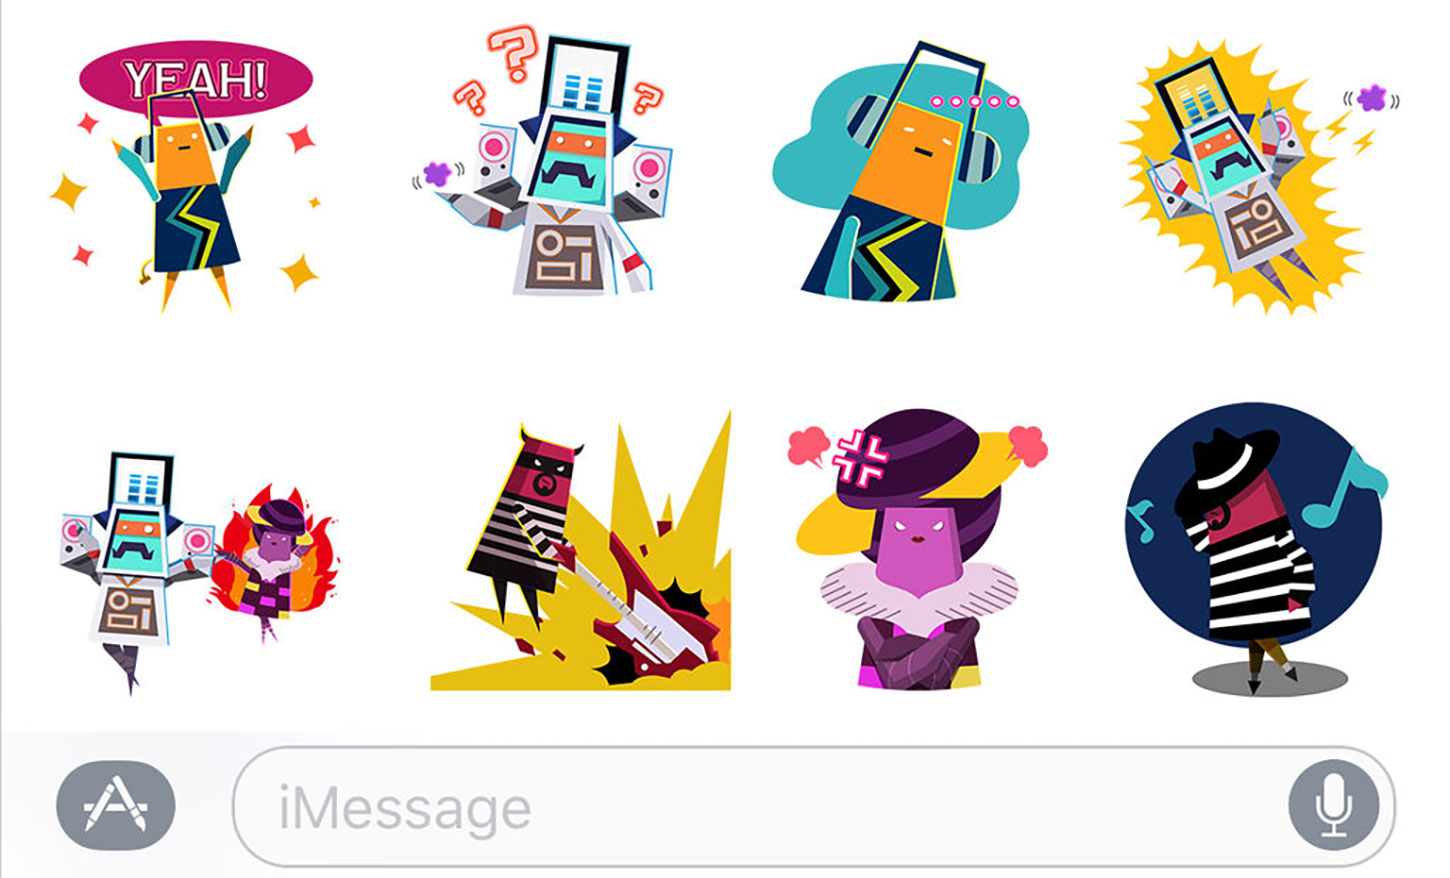 Manuscript Gloed Buitenlander iMessage Stickers More Than Tripled Downloads of Some iOS Games